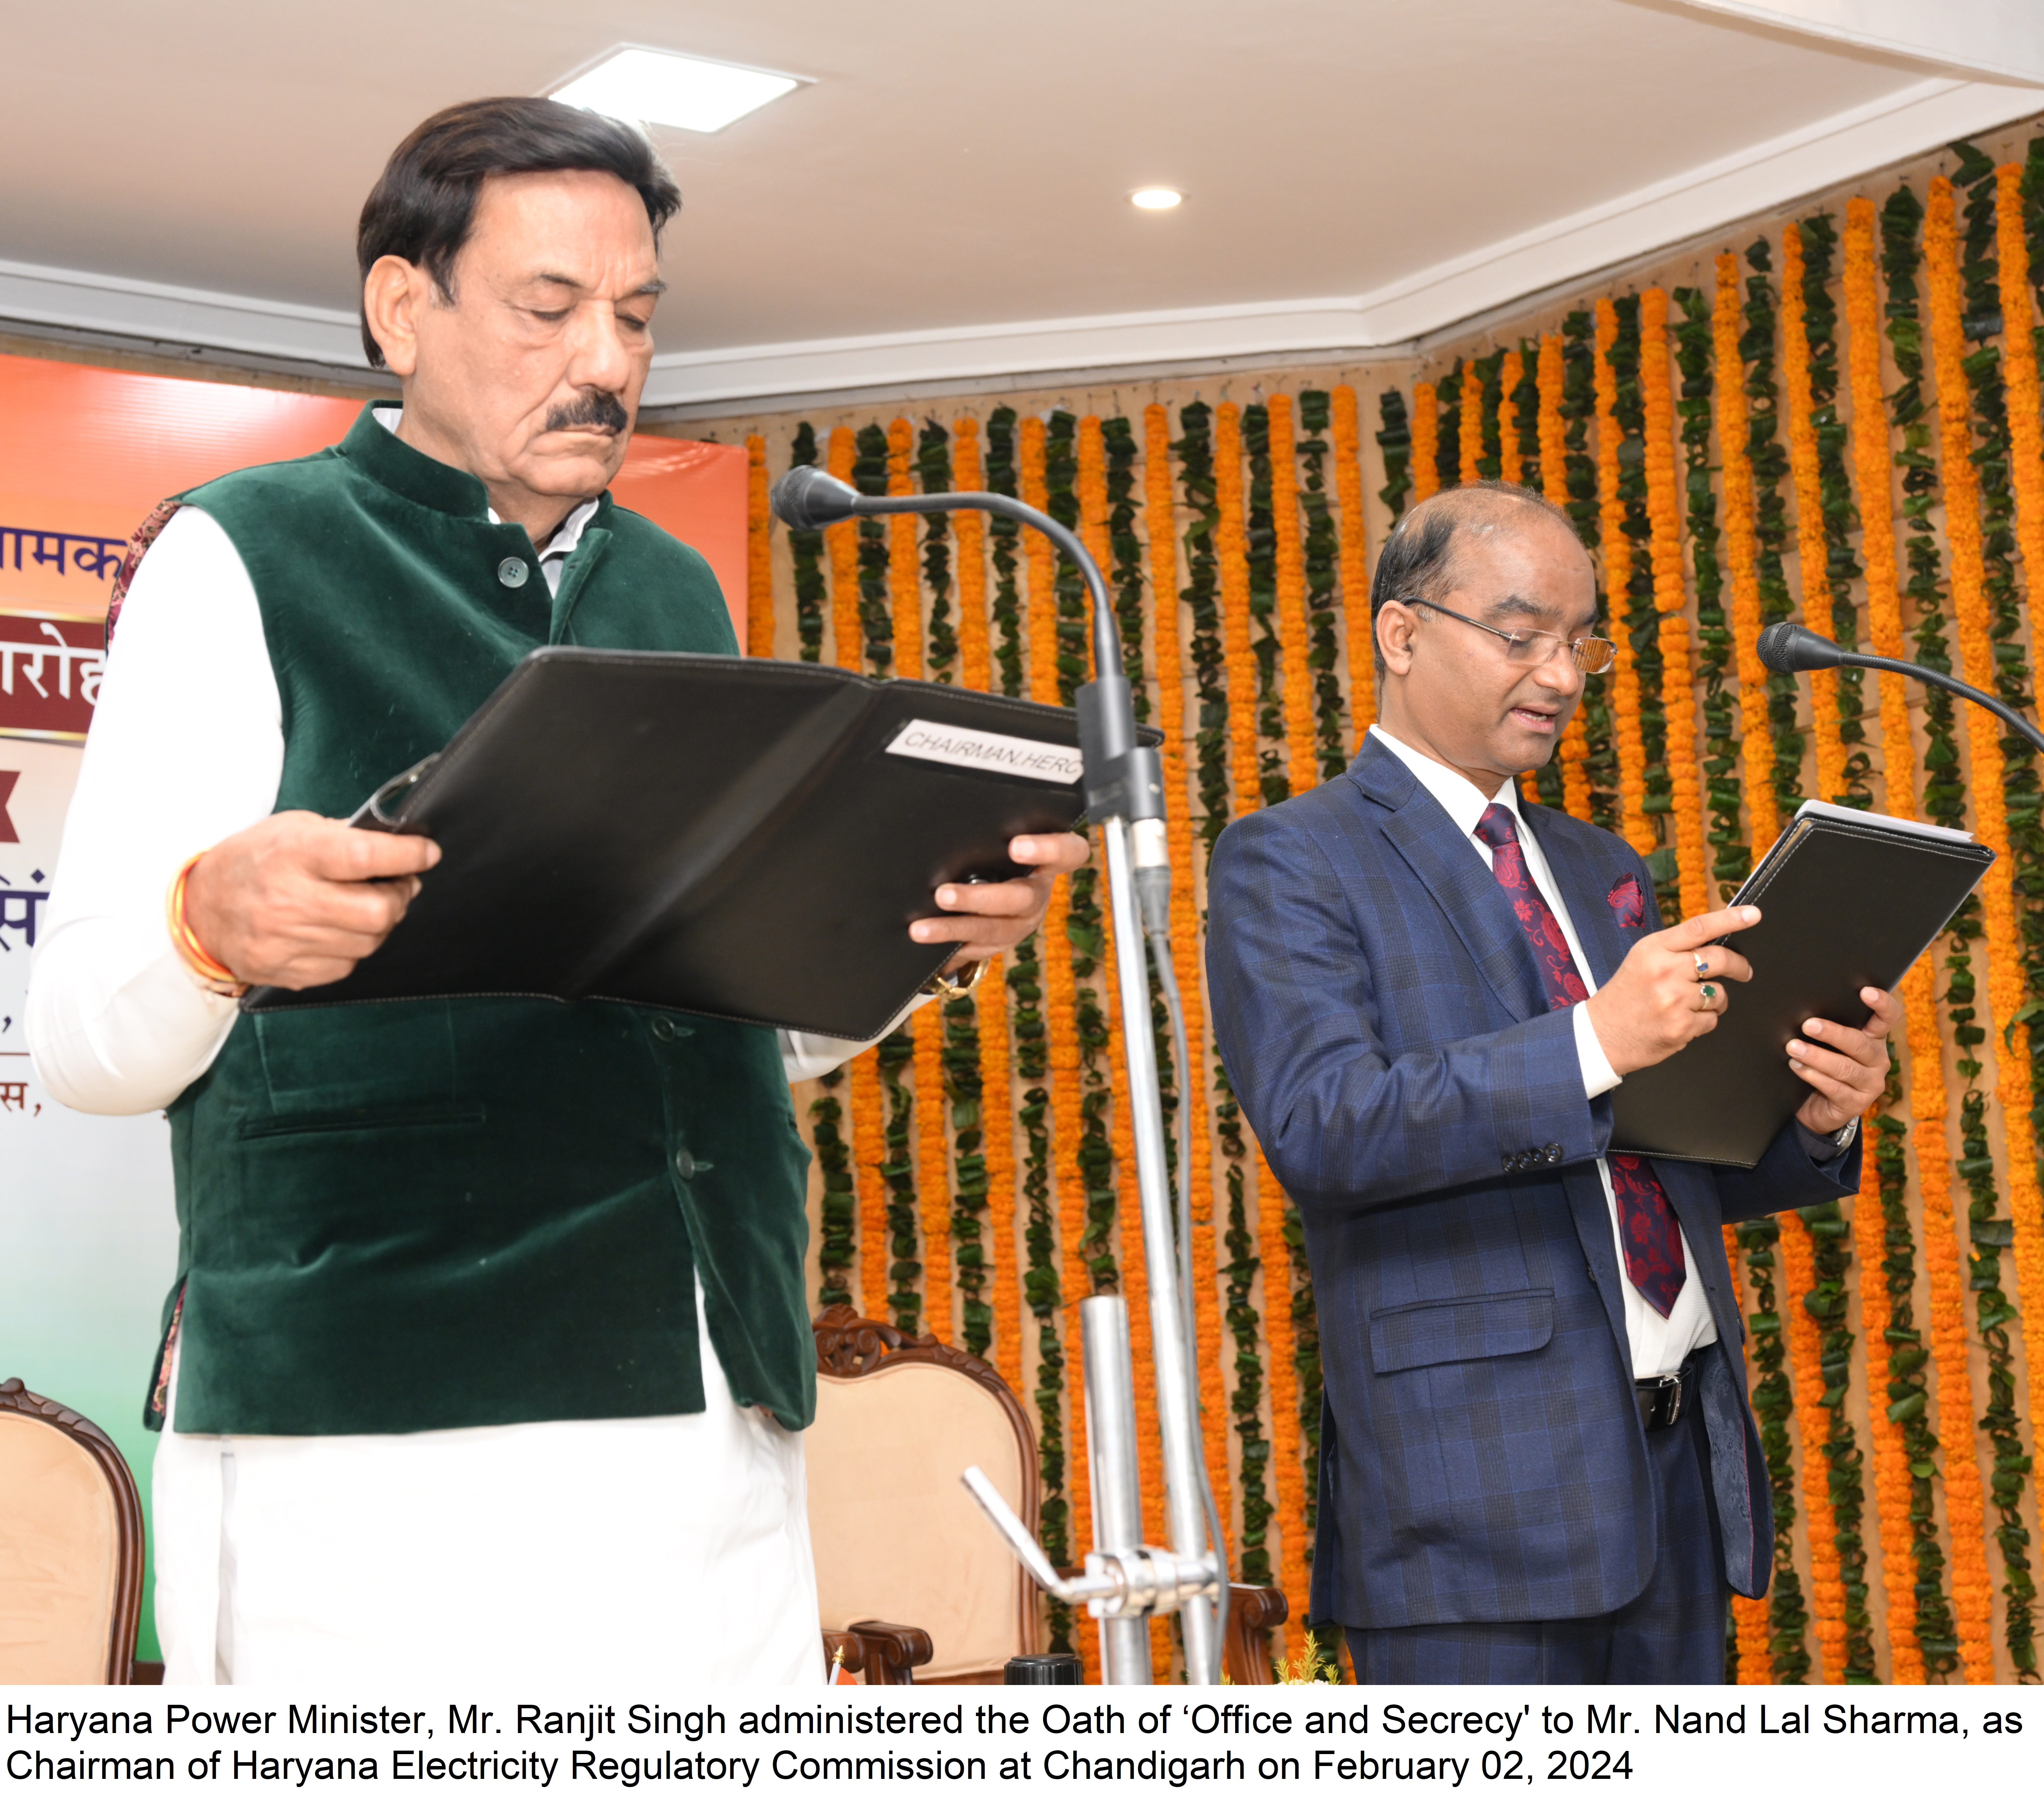 Haryana Power Minister, Mr. Ranjit Singh administered the Oath of ‘Office and Secrecy' to Mr. Nand Lal Sharma as Chairman of Haryana Electricity Regulatory Commission at Chandigarh on February 02, 2024